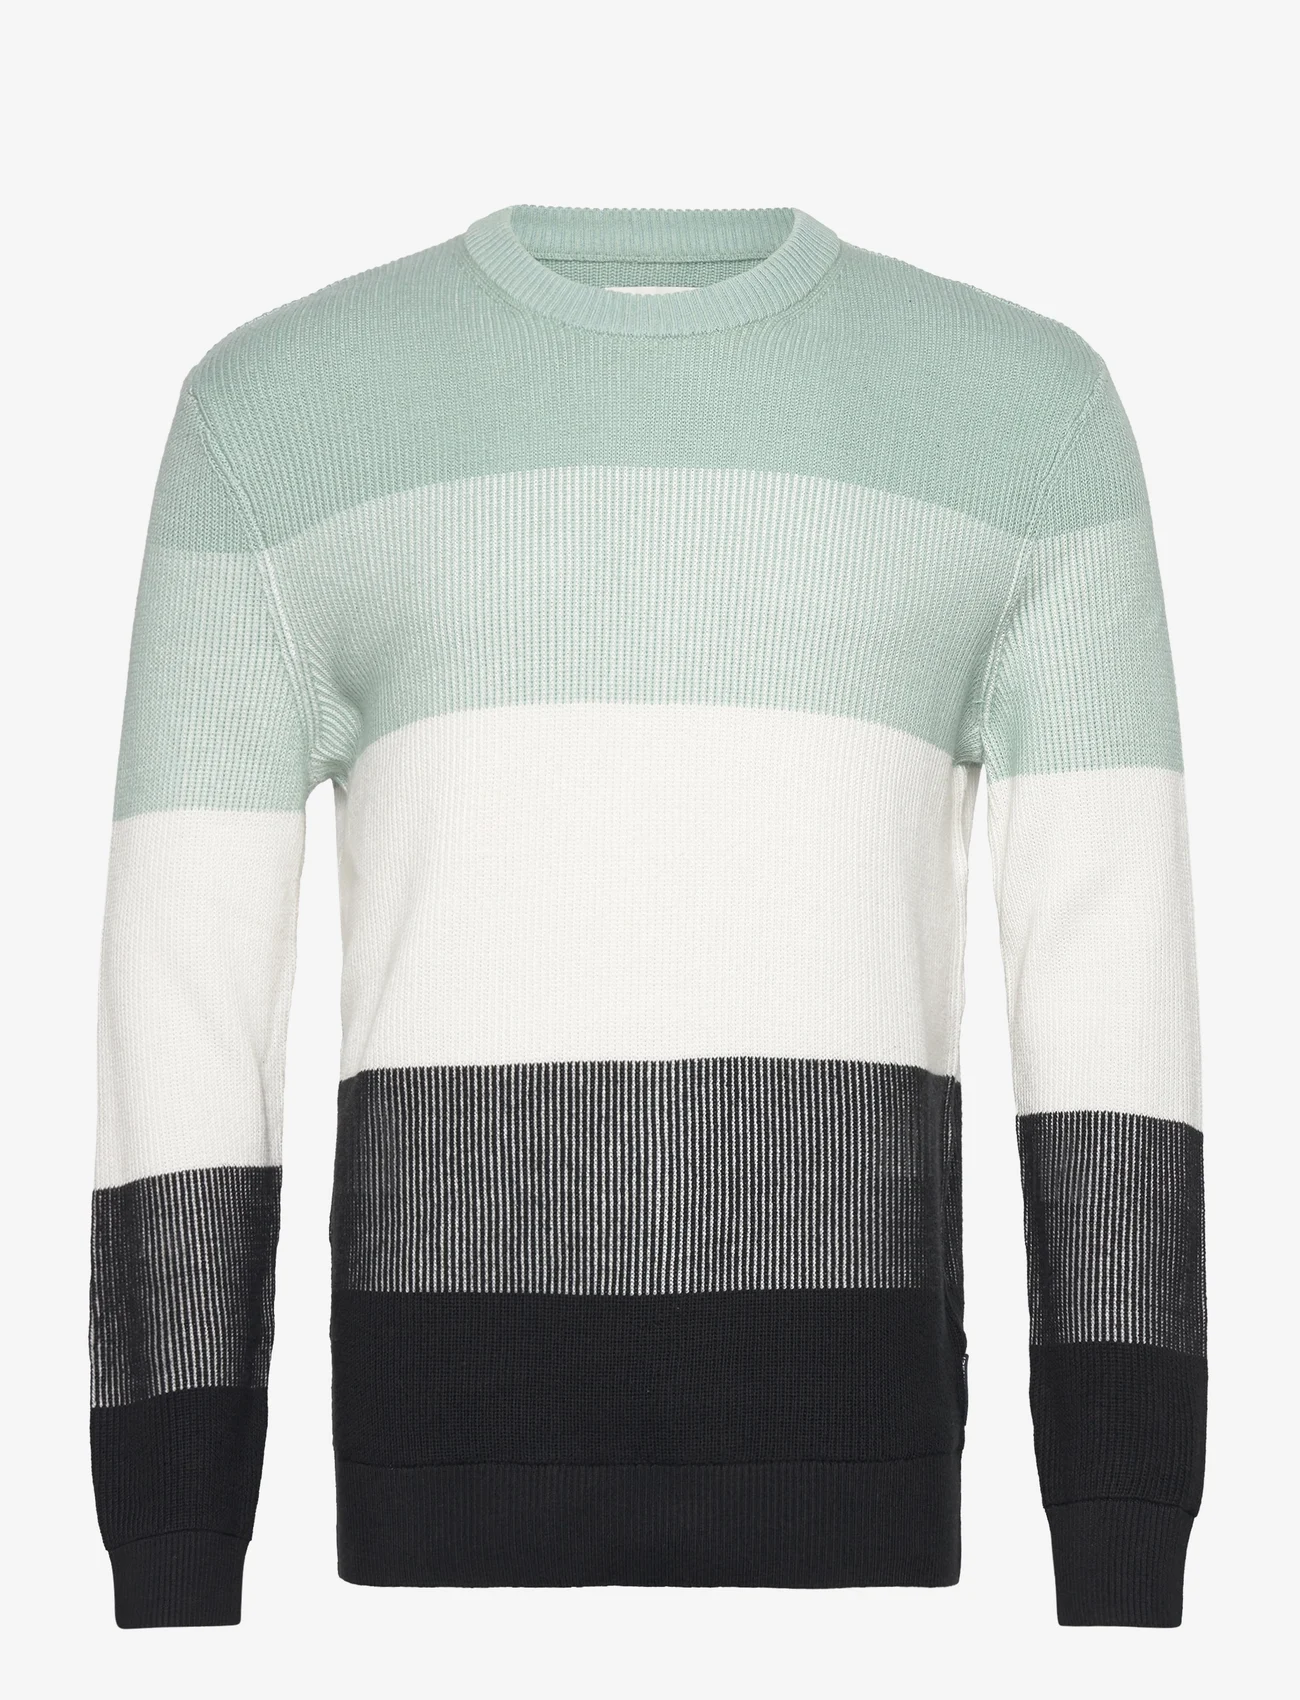 Tom Tailor - structured colorblock  knit - rundhals - mint white black colorblock - 0